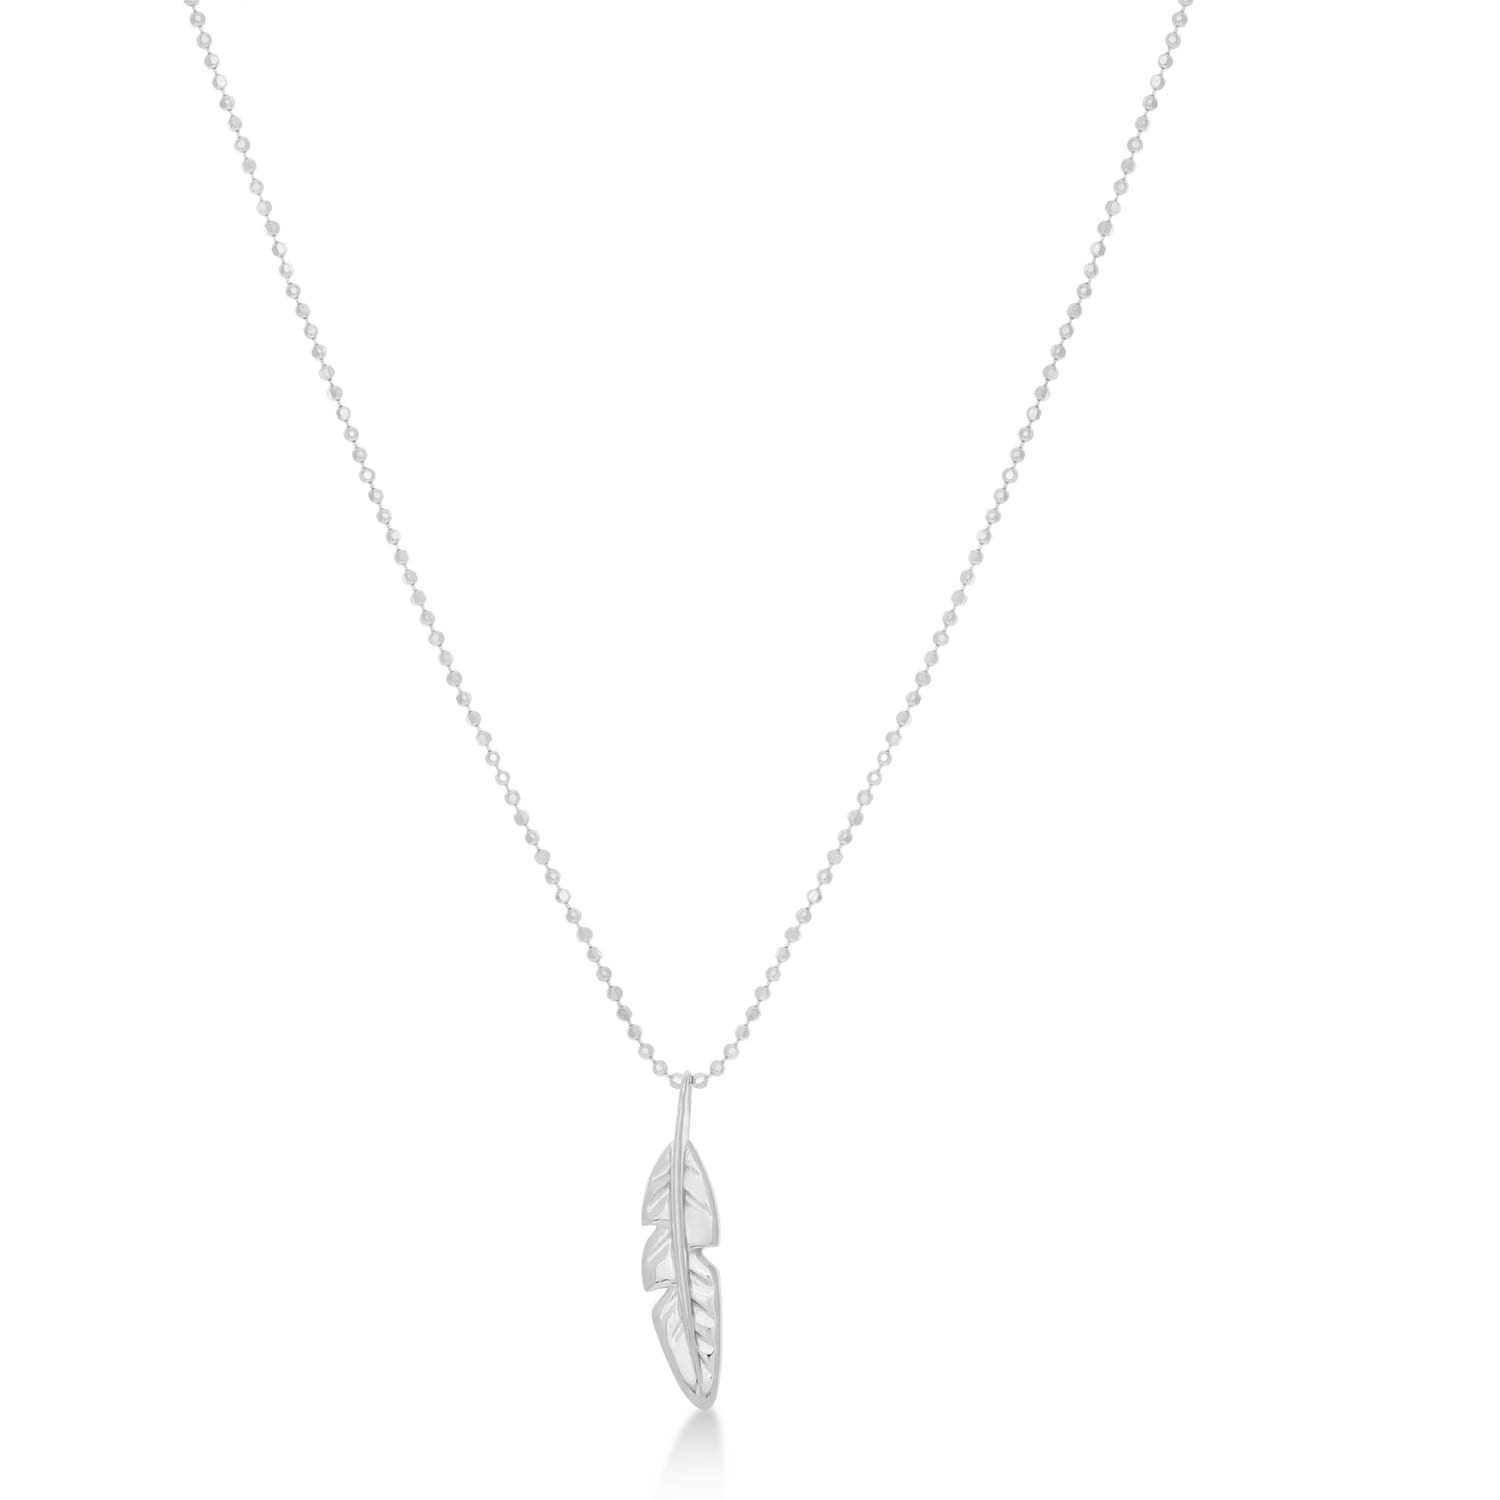 Feather Charm Pendant Necklace 14k White Gold